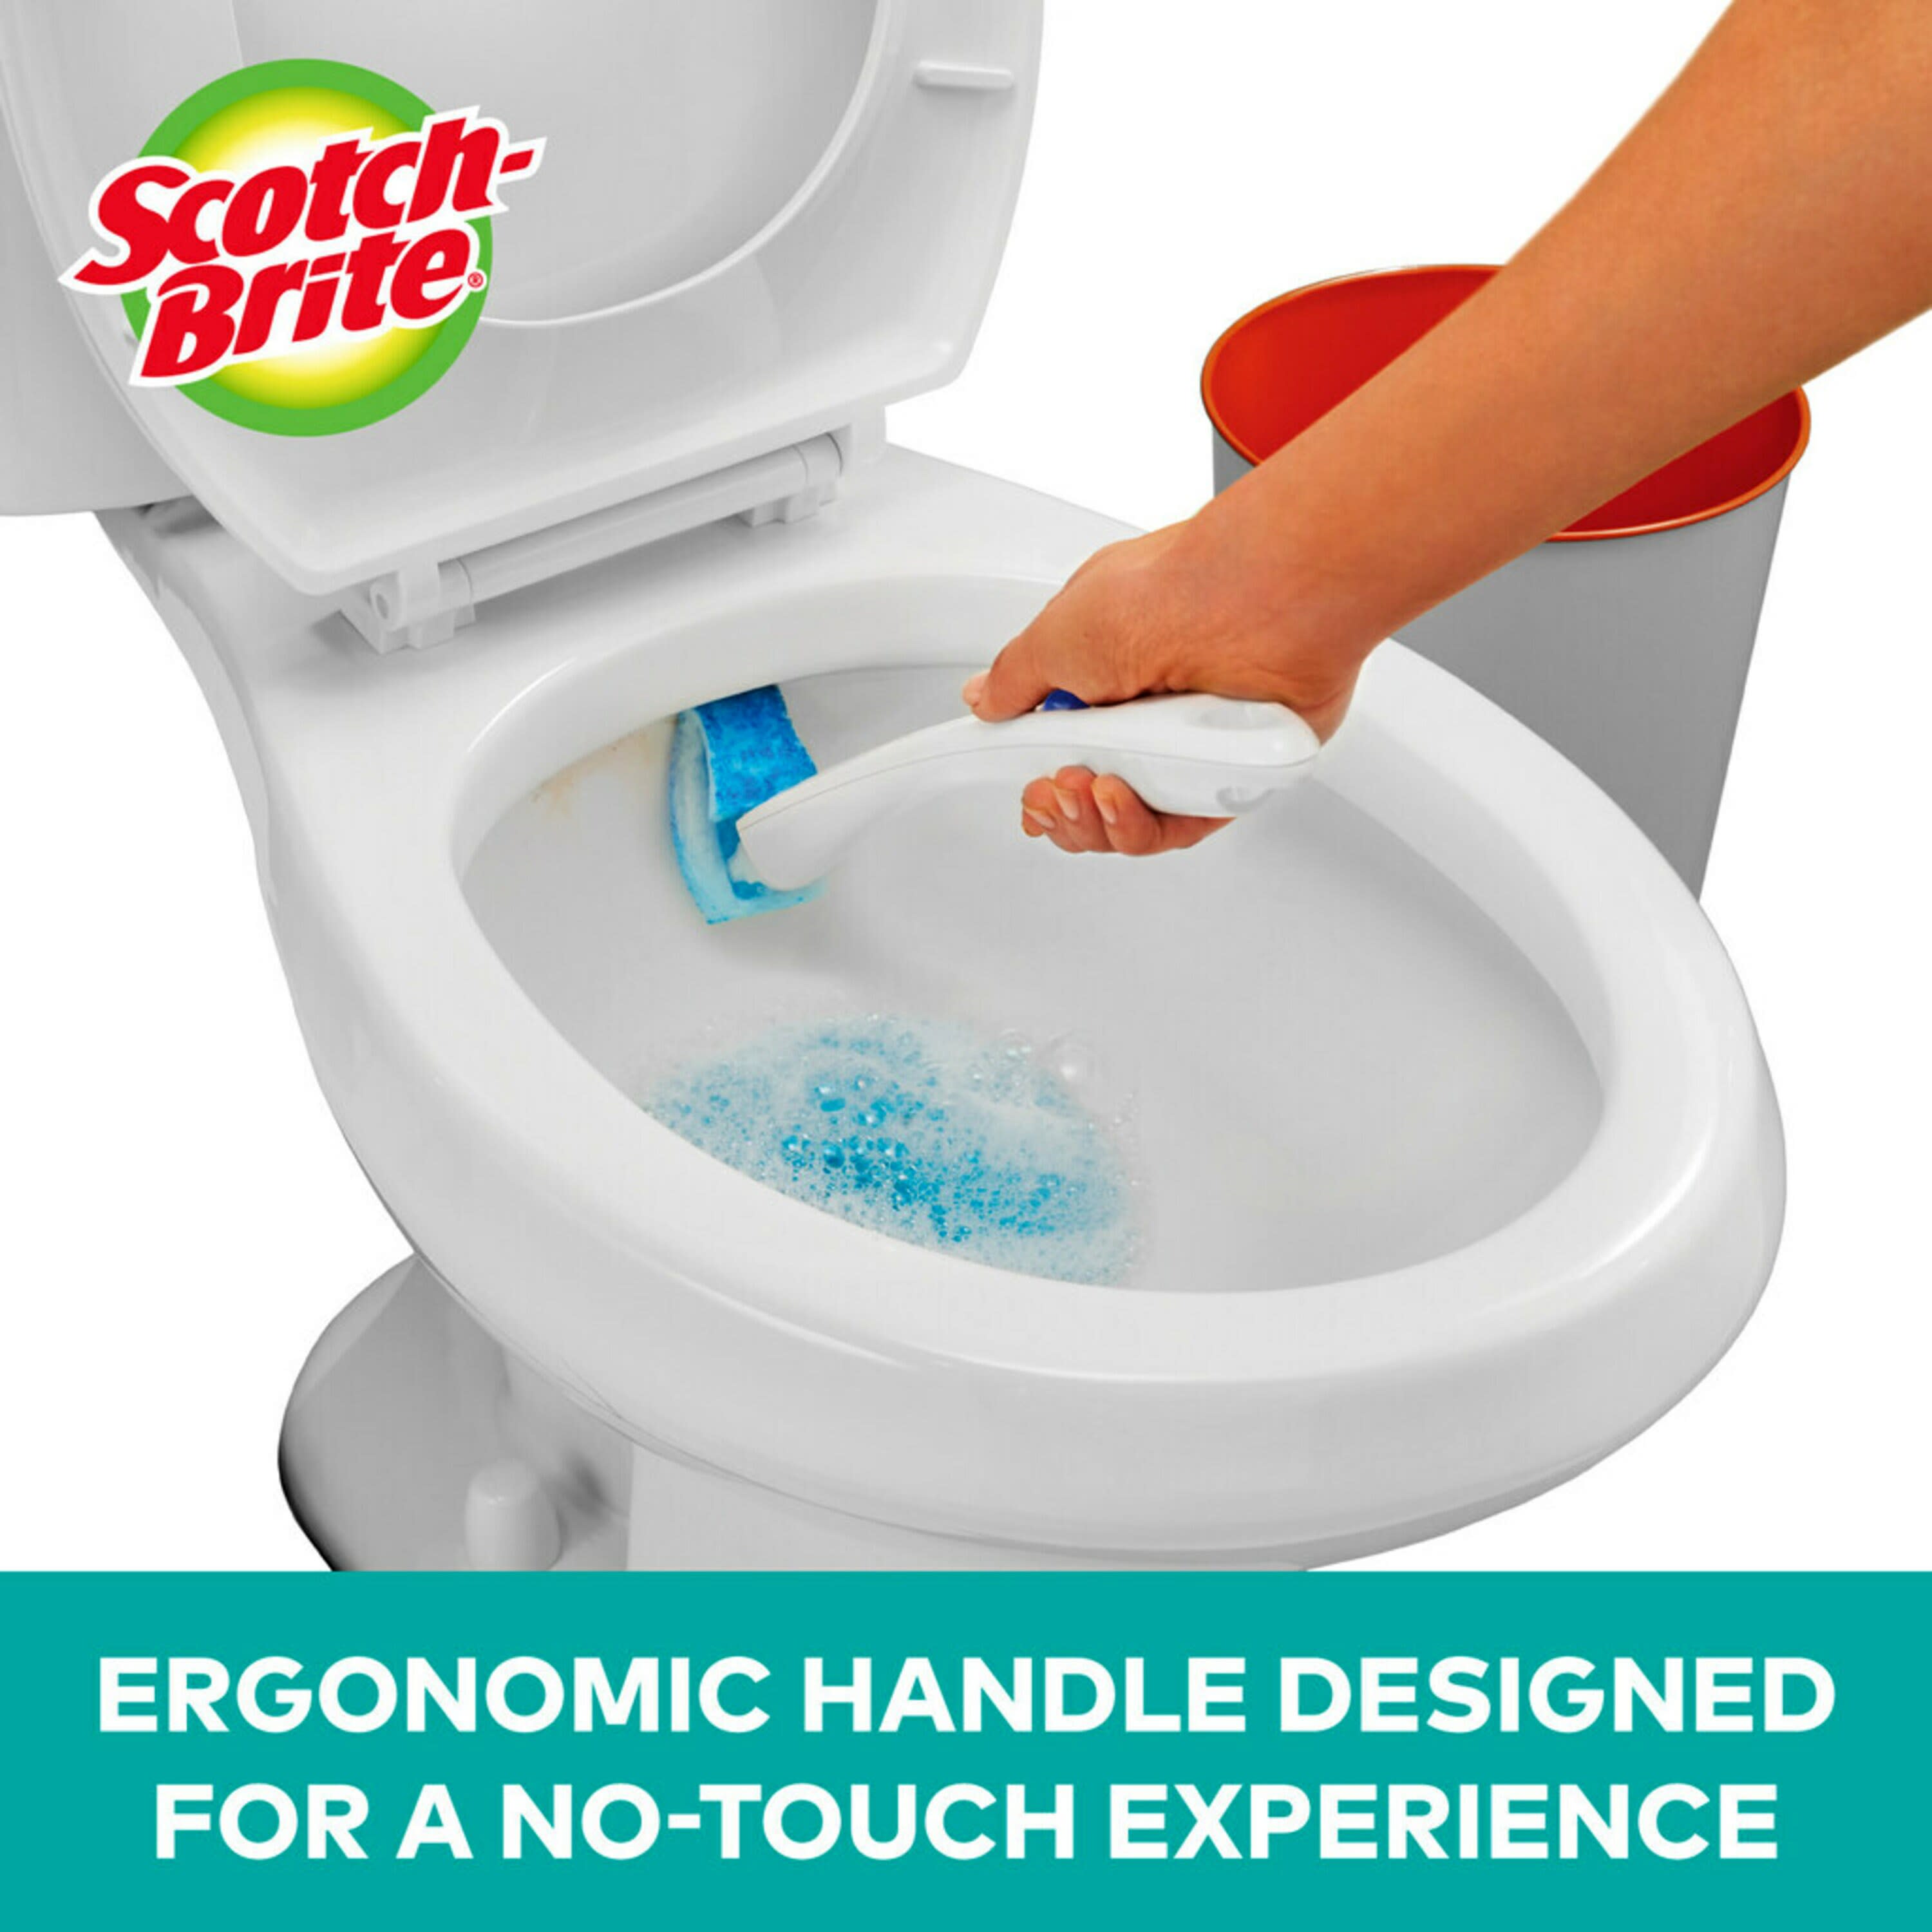 Scotch Brite Toilet Scrubber Cleaning Kit Delivery - DoorDash